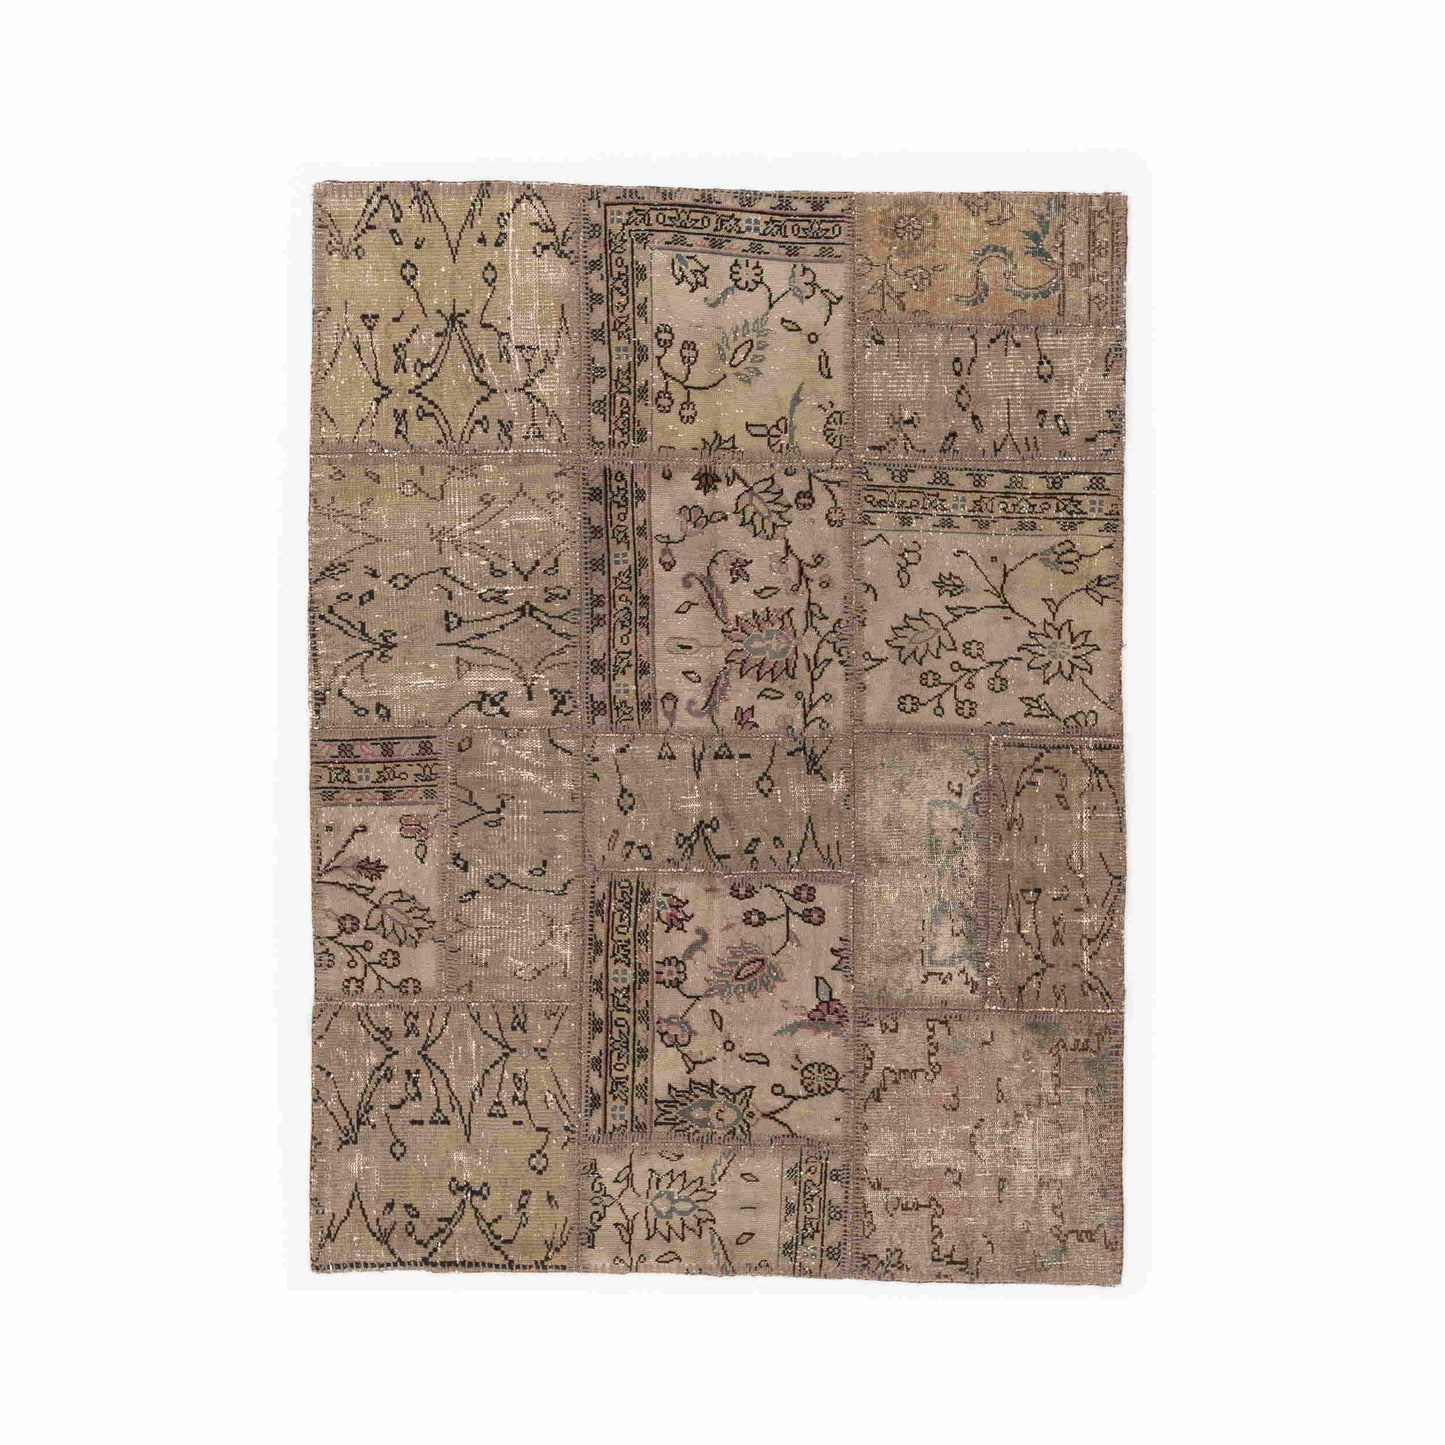 Oriental Rug Patchwork Hand Knotted Wool On Wool 149 x 201 Cm - 4' 11'' x 6' 8'' ER12